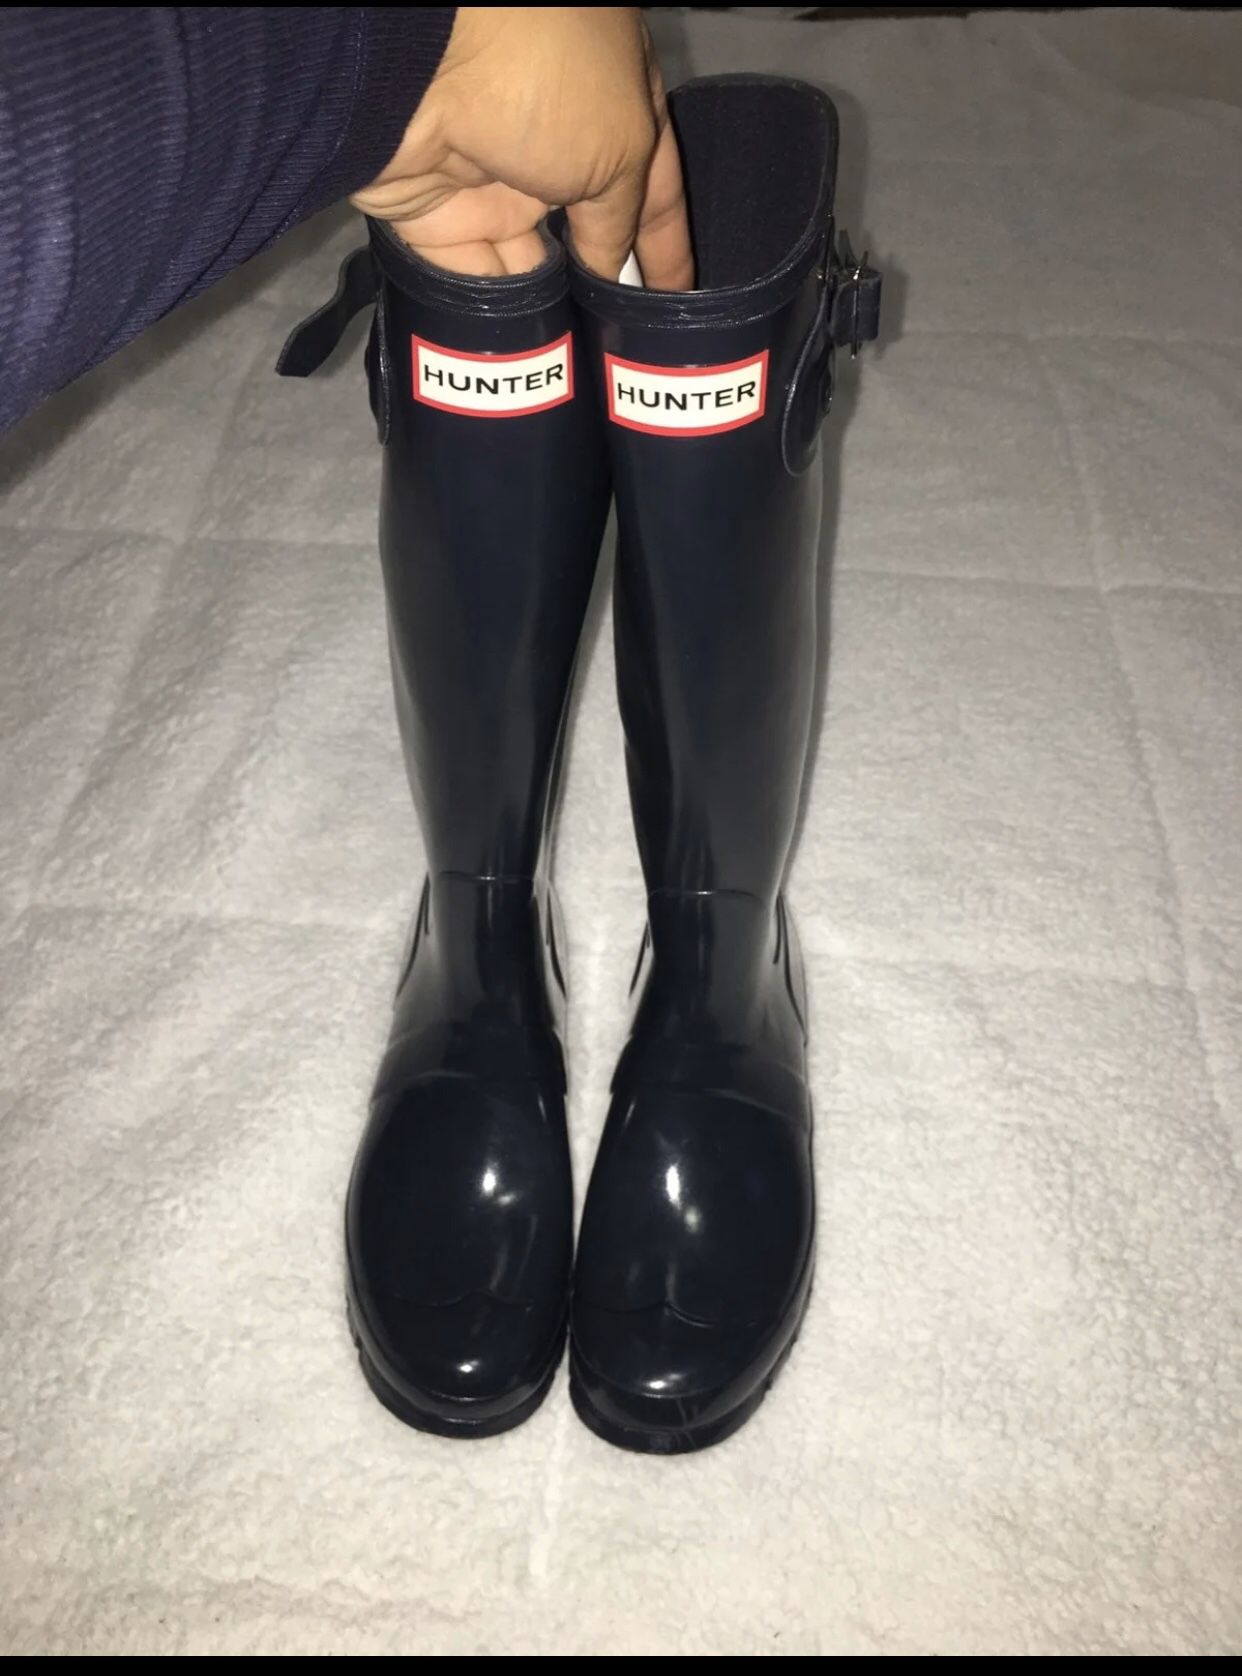 Hunter rain boots-Serious buyers only.